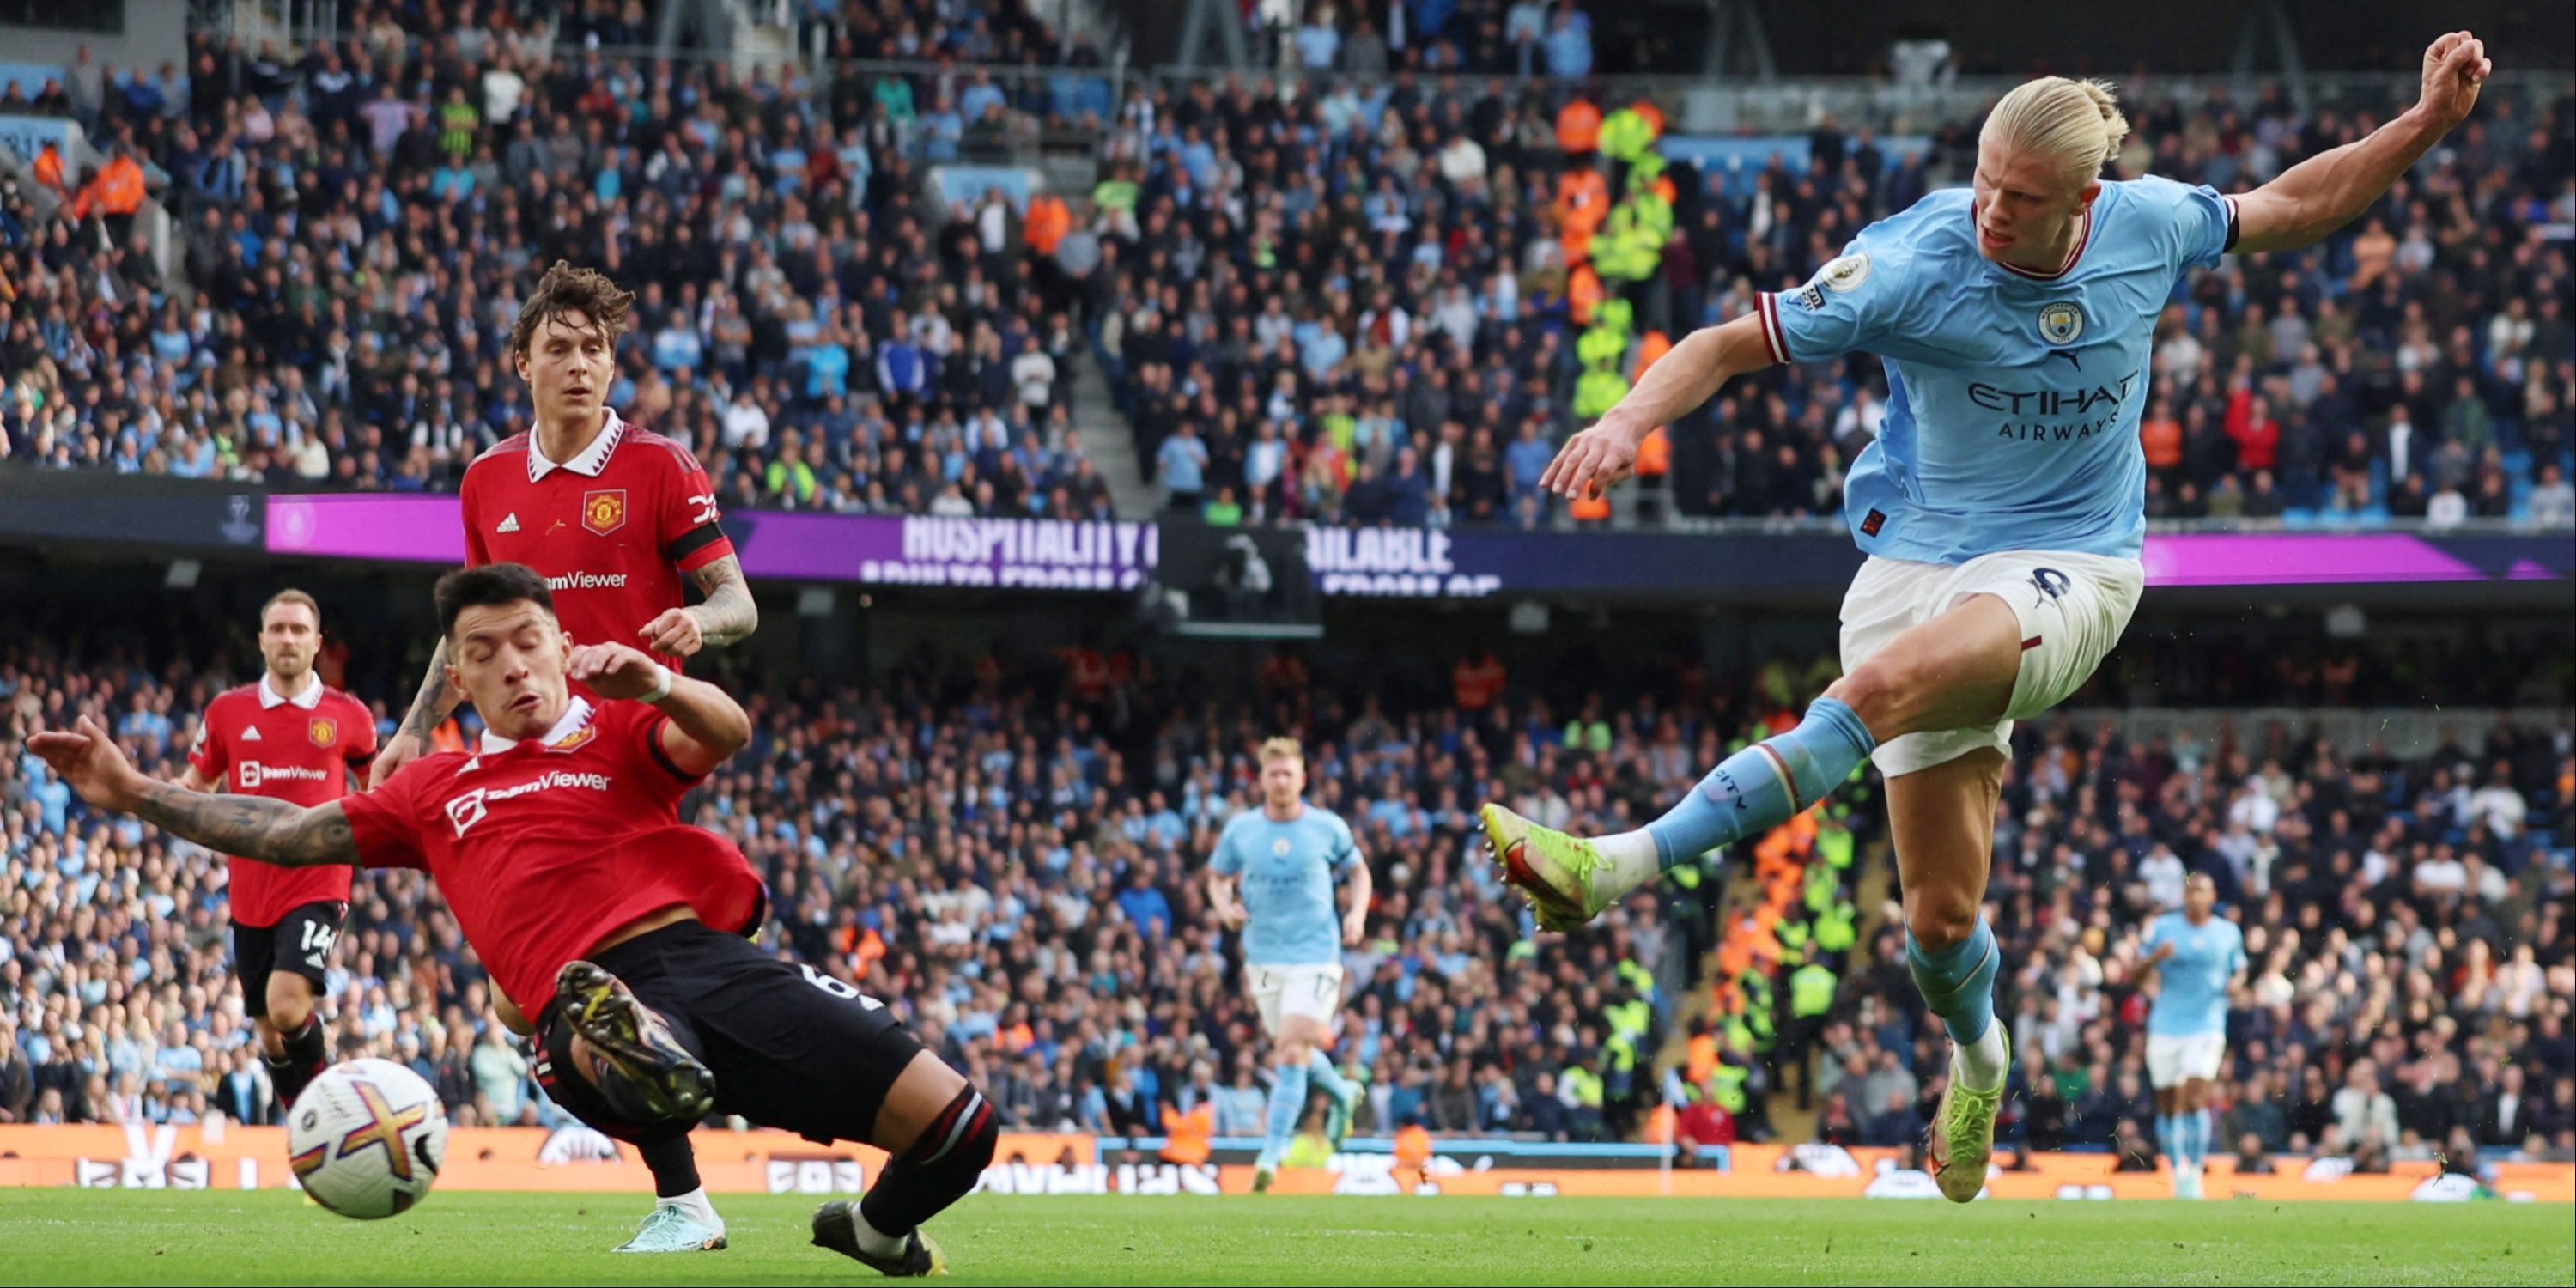 Erling Haaland and Lisandro Maritnez in action during the Manchester derby